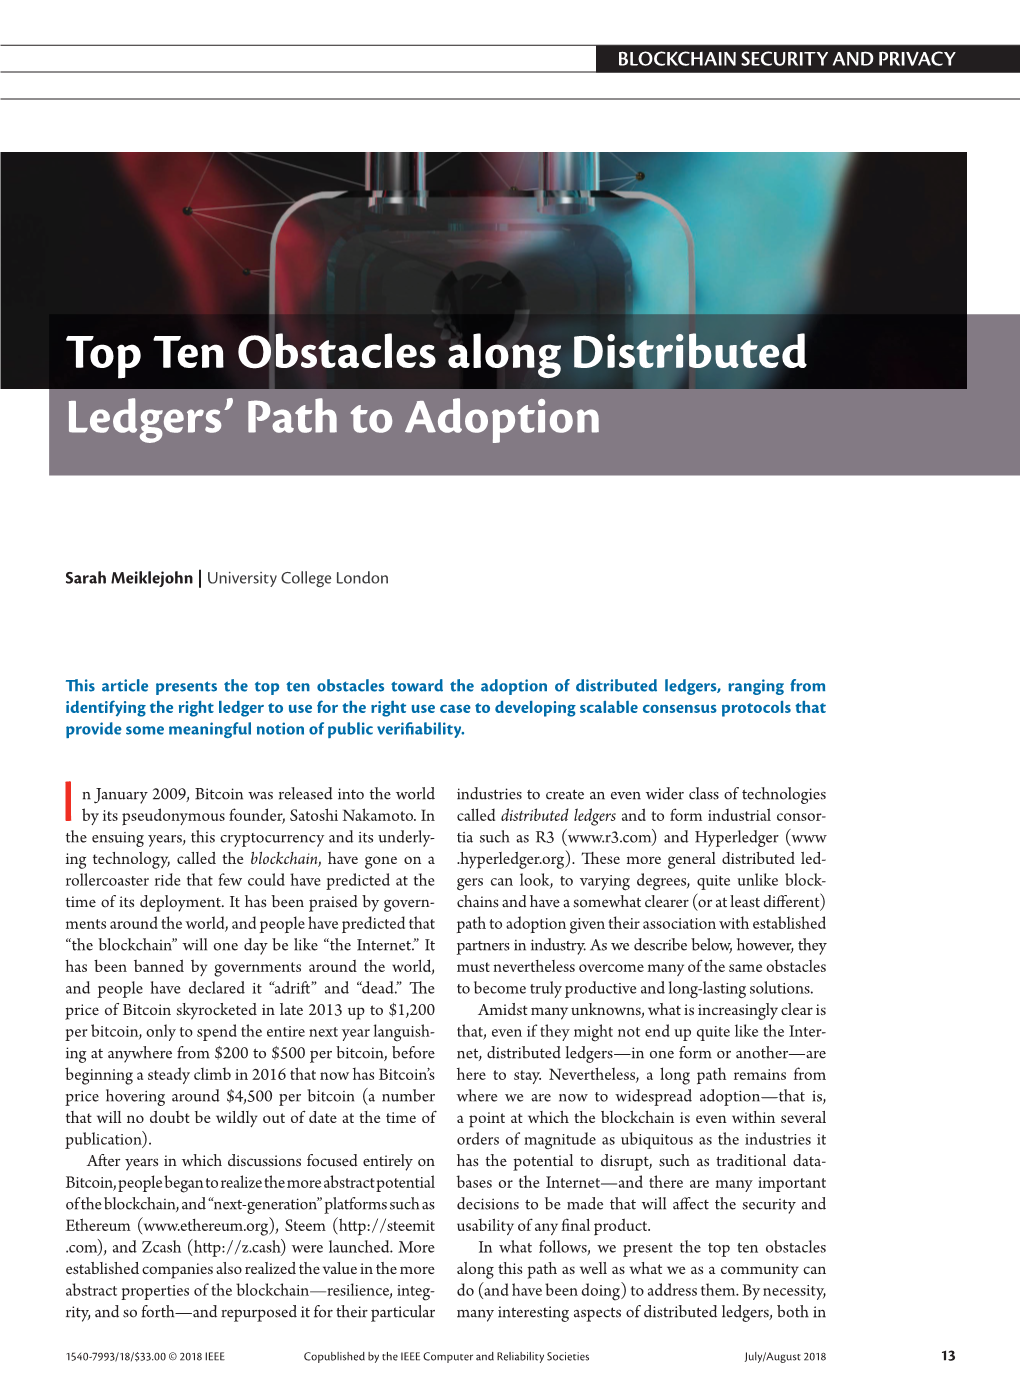 Top Ten Obstacles Along Distributed Ledgers Path to Adoption